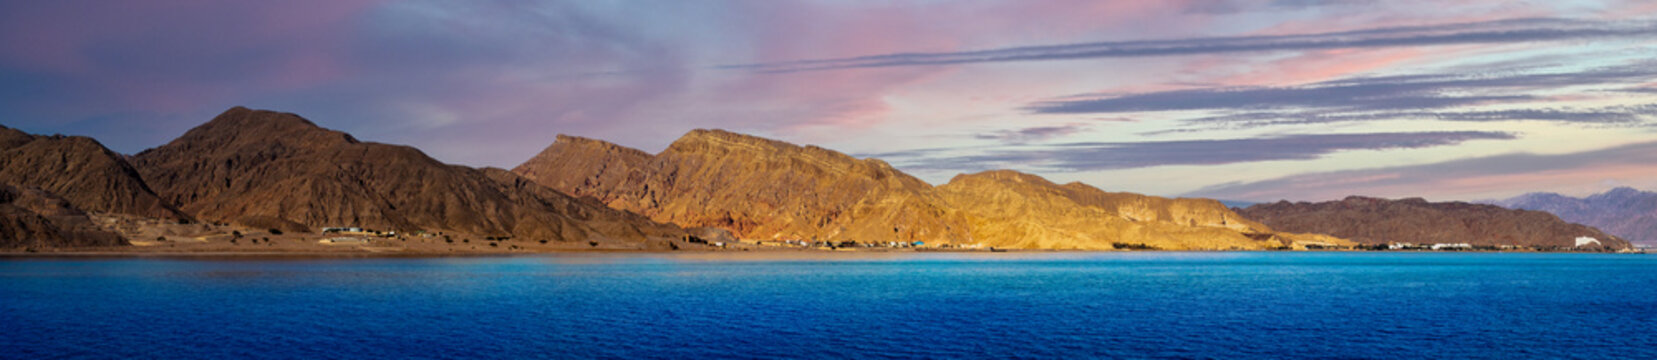 Coast of the Red Sea in the Gulf of Aqaba on the border of Egypt and Israel, Taba region, Sinai. Panoramic landscape with mountain ranges and beautiful cloudy sky at sunset.